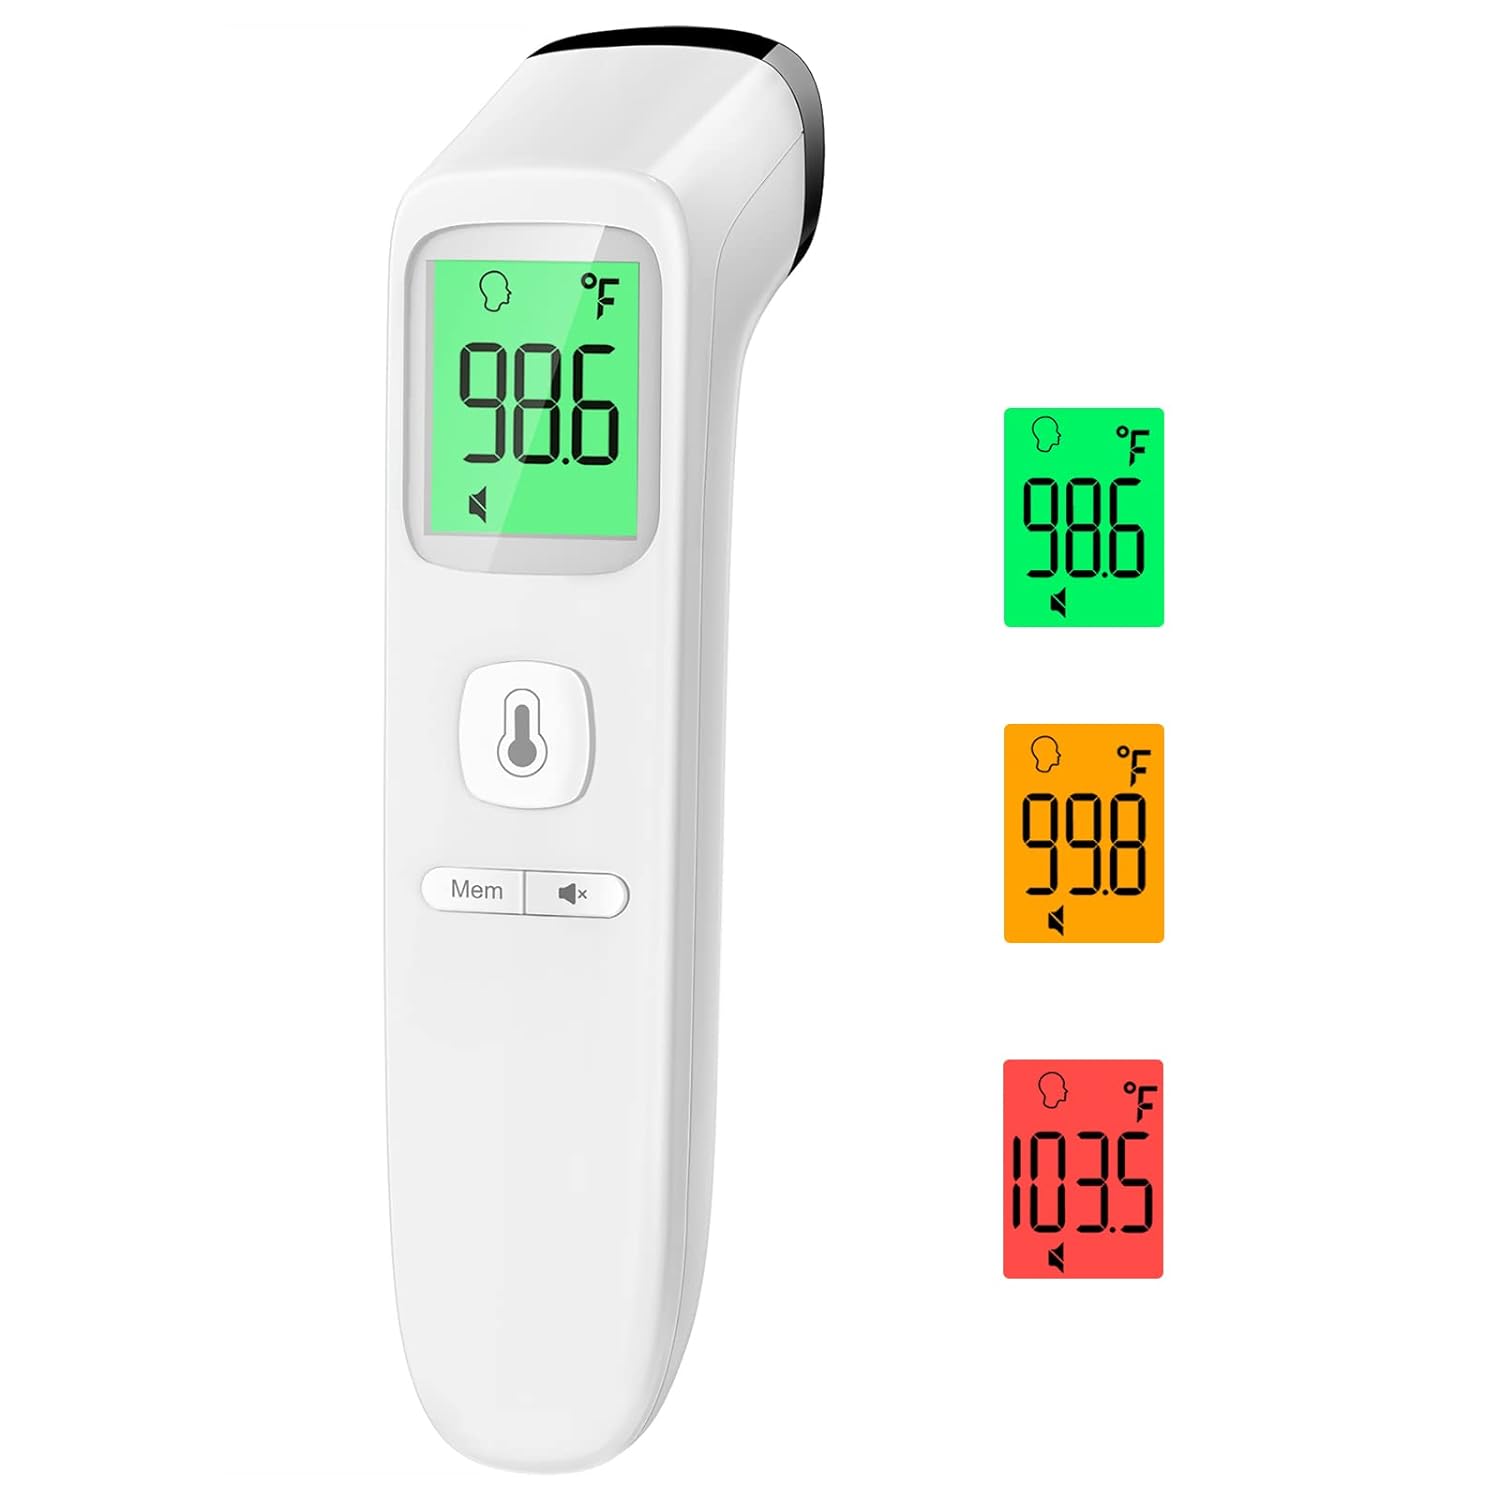 No-Touch Thermometer for Adults and Kids, Fast Accurate Digital Thermometer with Fever Alarm & Silent Mode, Easy-to-use, Forehead & Ear Thermometer for Babies, Kids & Elderly